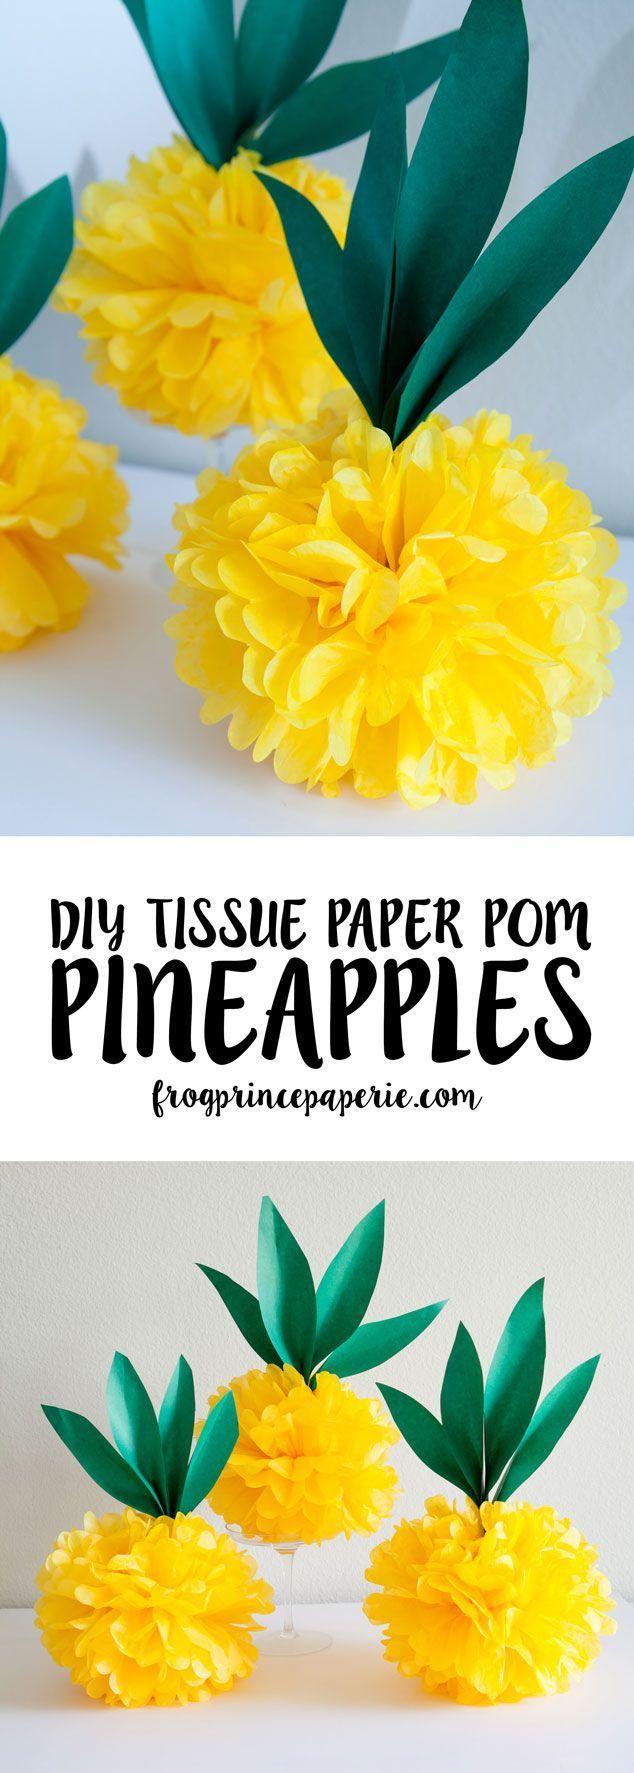 24 Elegant Paper Vase Hat 2024 free download paper vase hat of diy beach party decorations ideas inspirational diy home decor vaseh with regard to diy beach party decorations ideas beautiful luau tissue paper pineapple pouf and diy pin